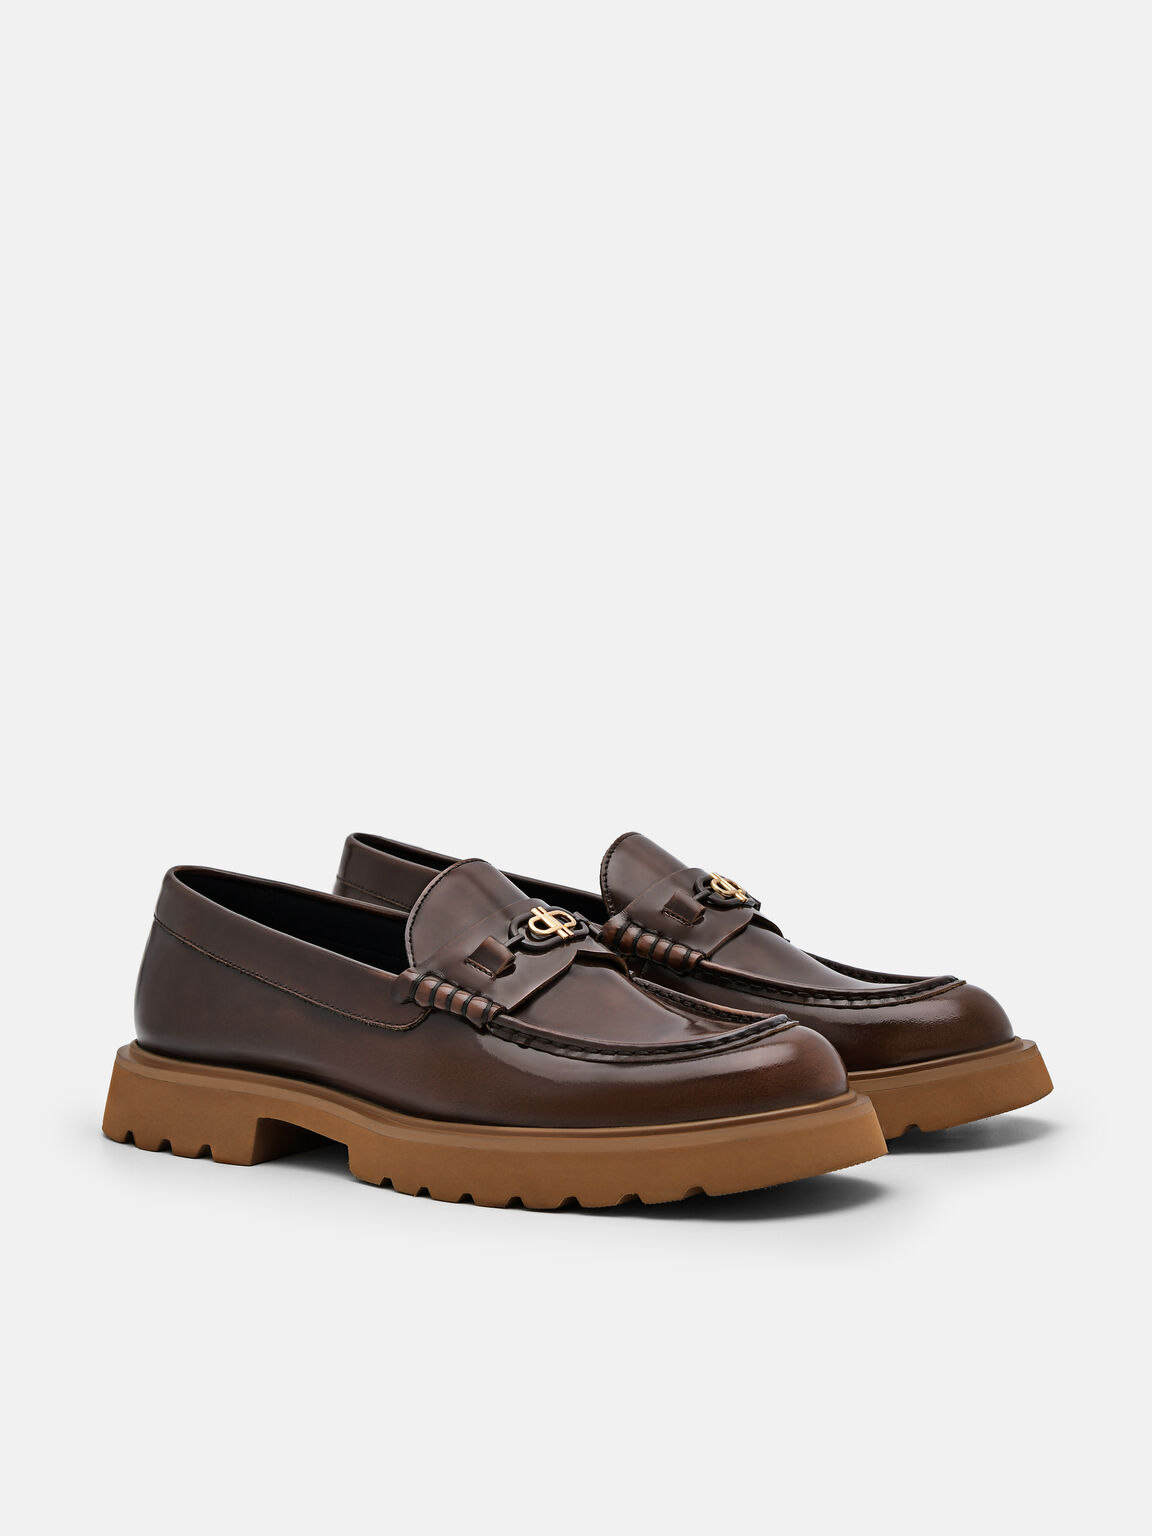 PEDRO Icon Leather Loafers, Dark Brown, hi-res